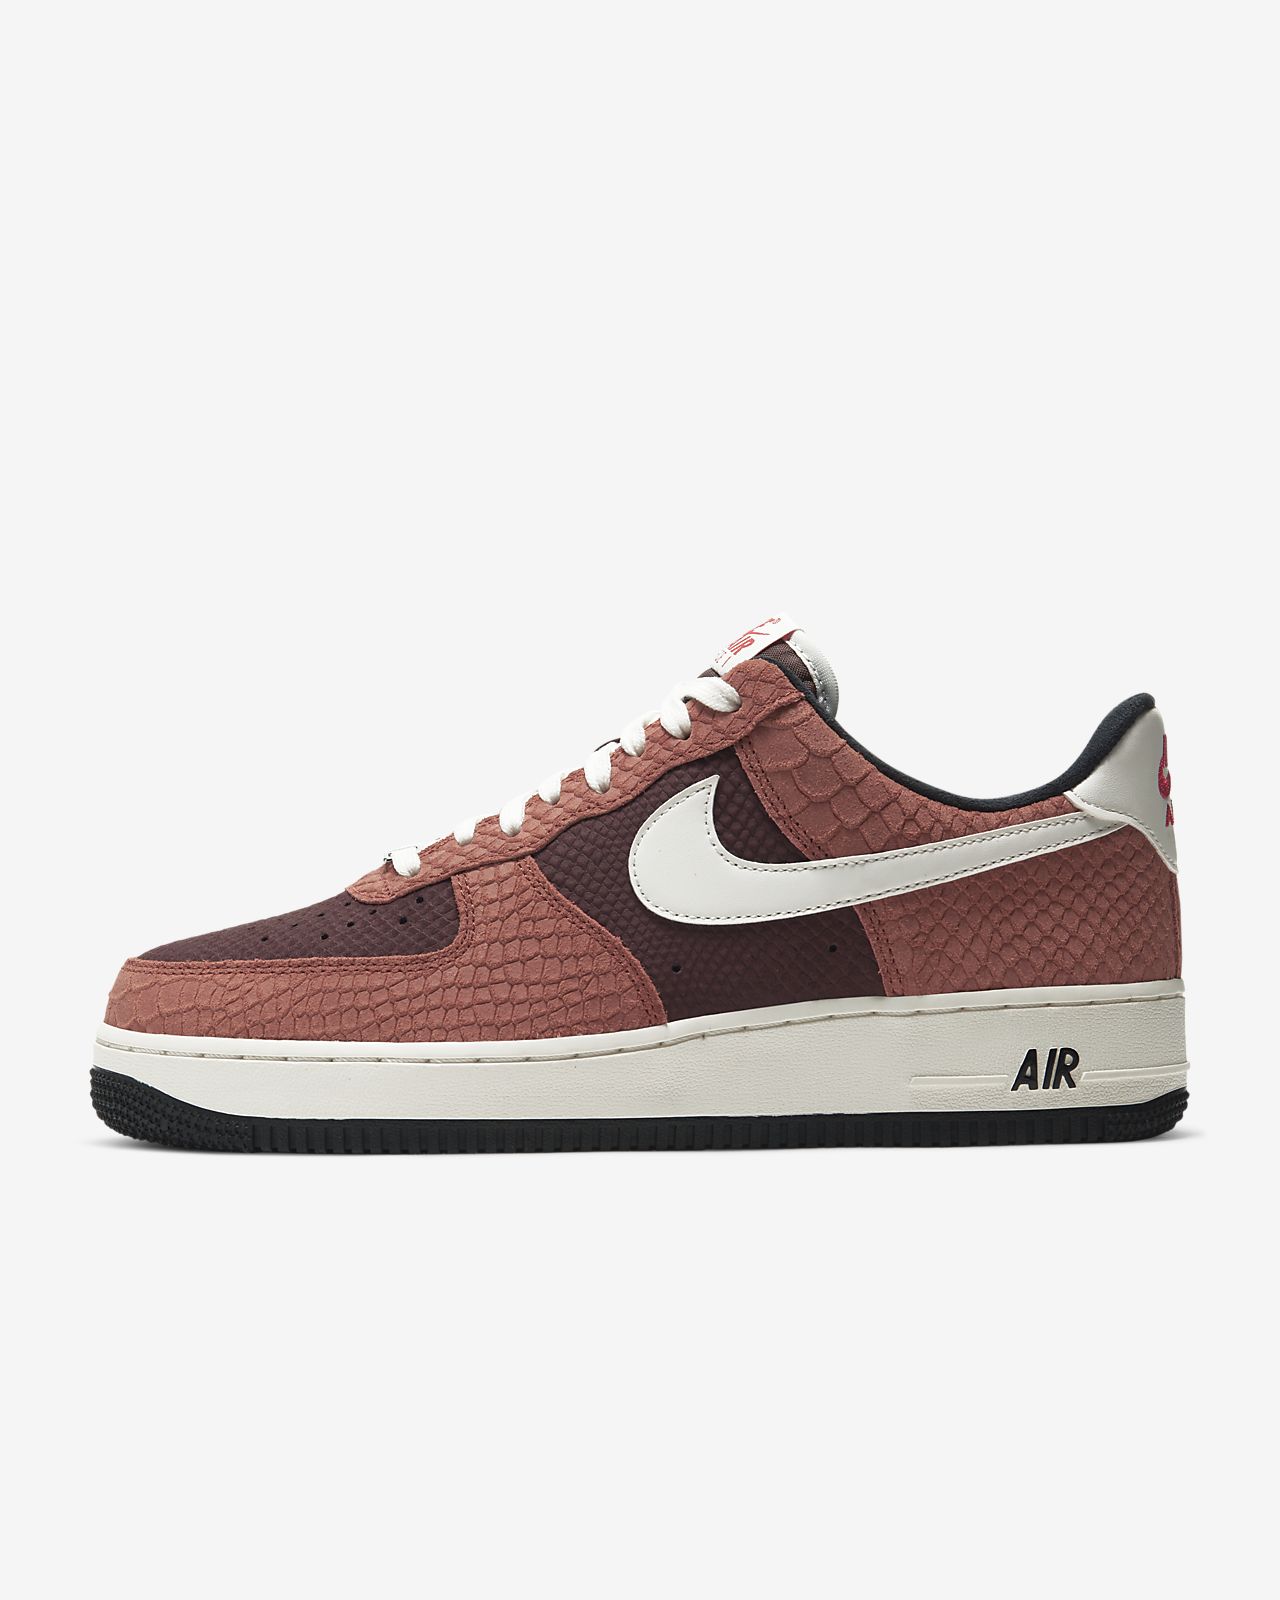 nike air force 1 hombre beige